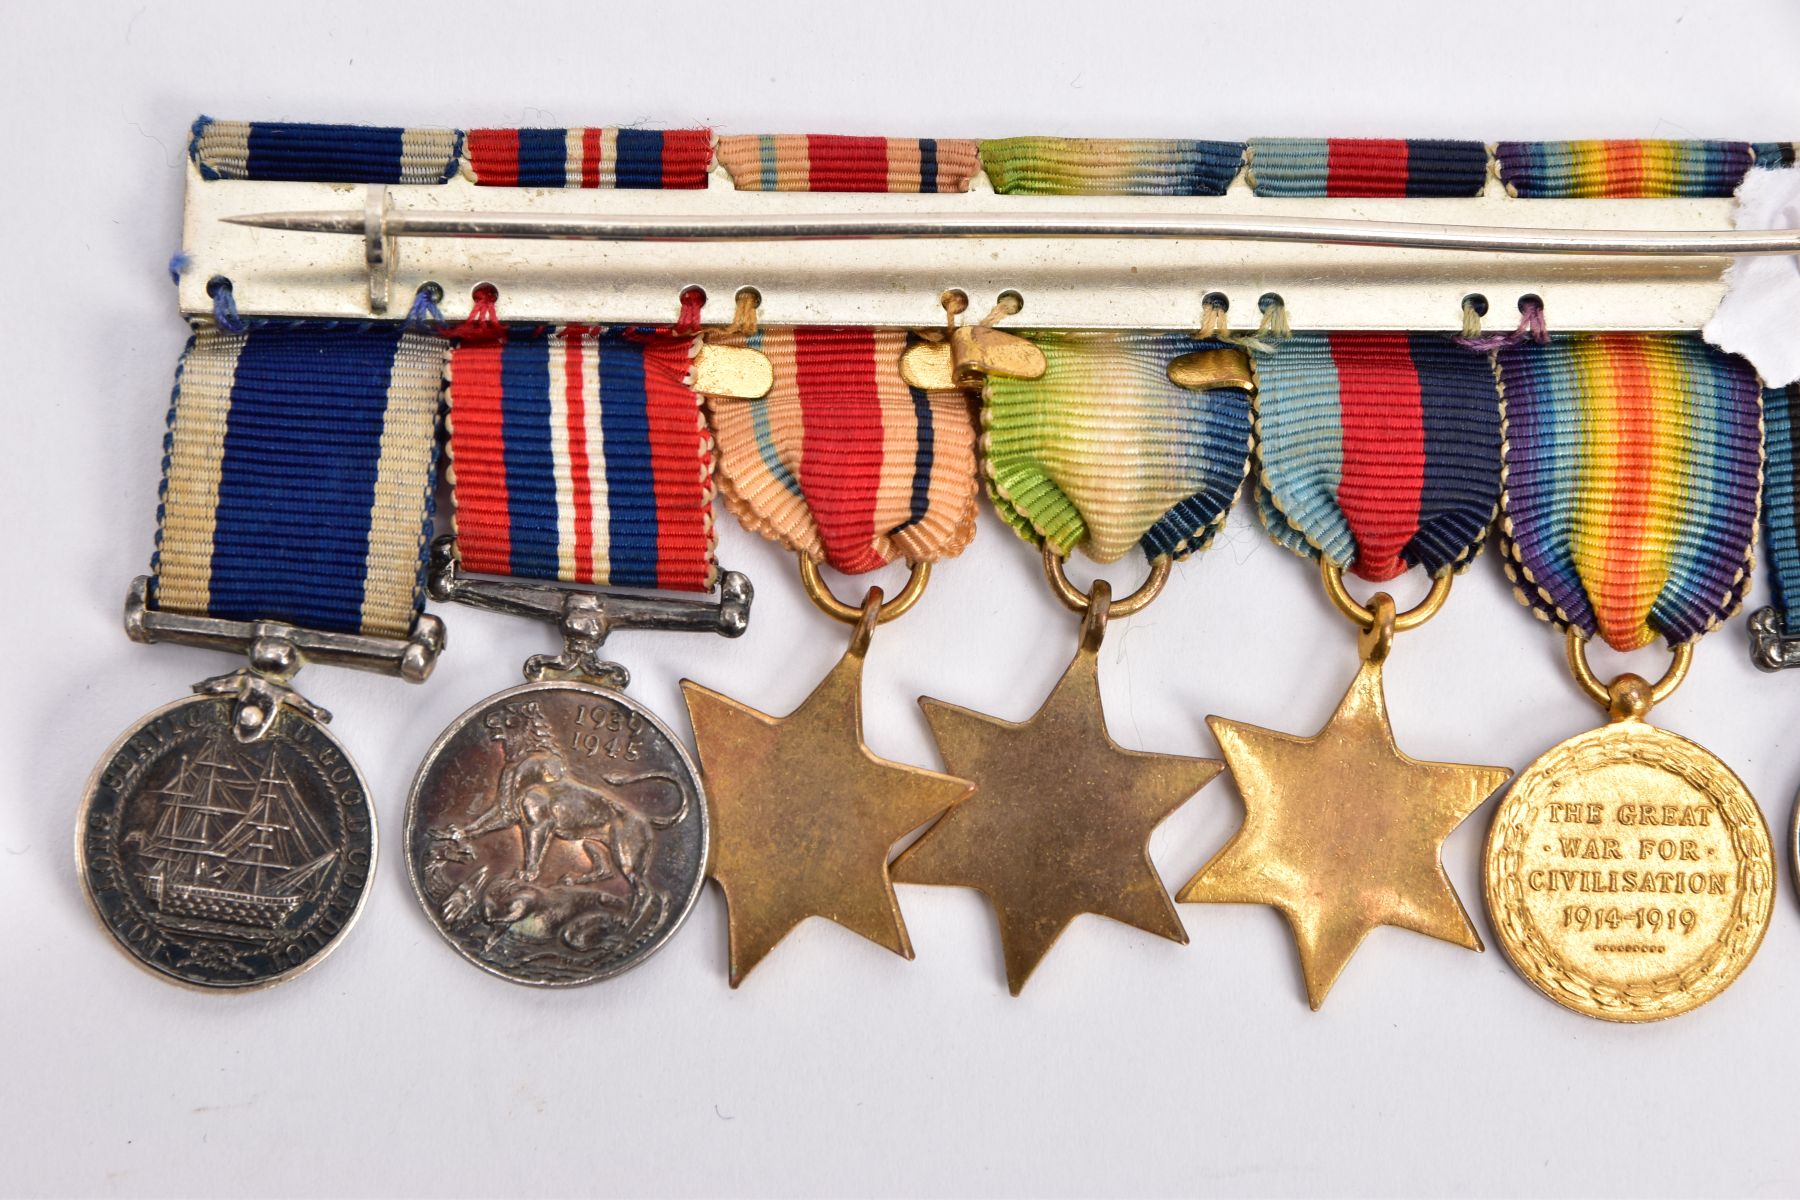 TWO MINIATURE GROUPS OF MEDALS, British War & Victory pair, British War & Victory, 1939-45, Atlantic - Image 5 of 6